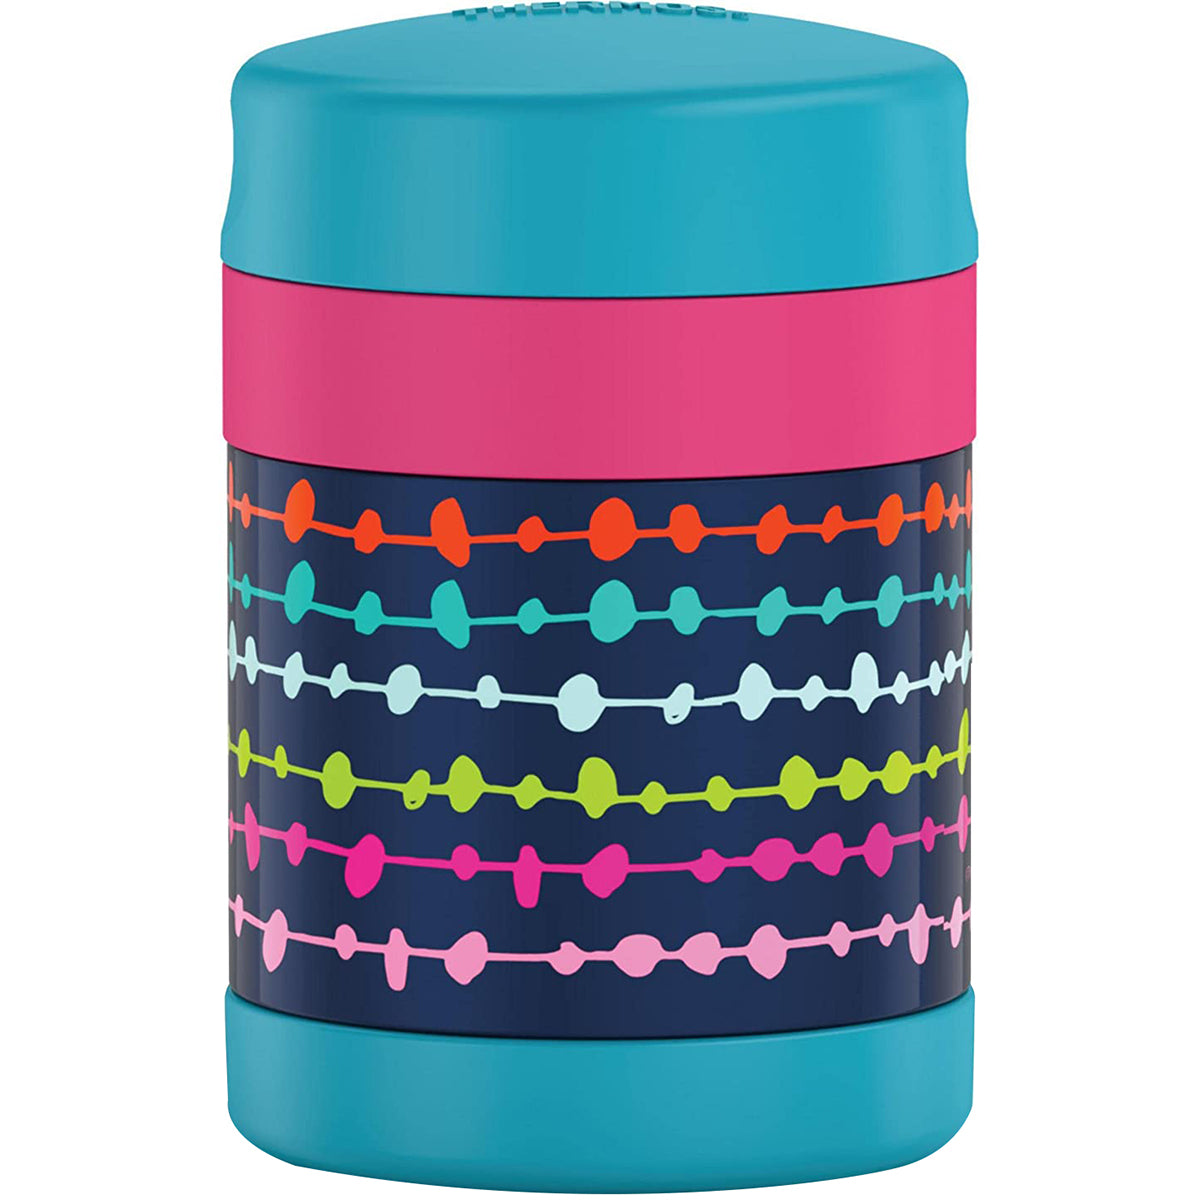 Thermos 10 oz. Kid's Funtainer Stainless Steel Food Jar w/ Spoon - Lines & Dots Thermos